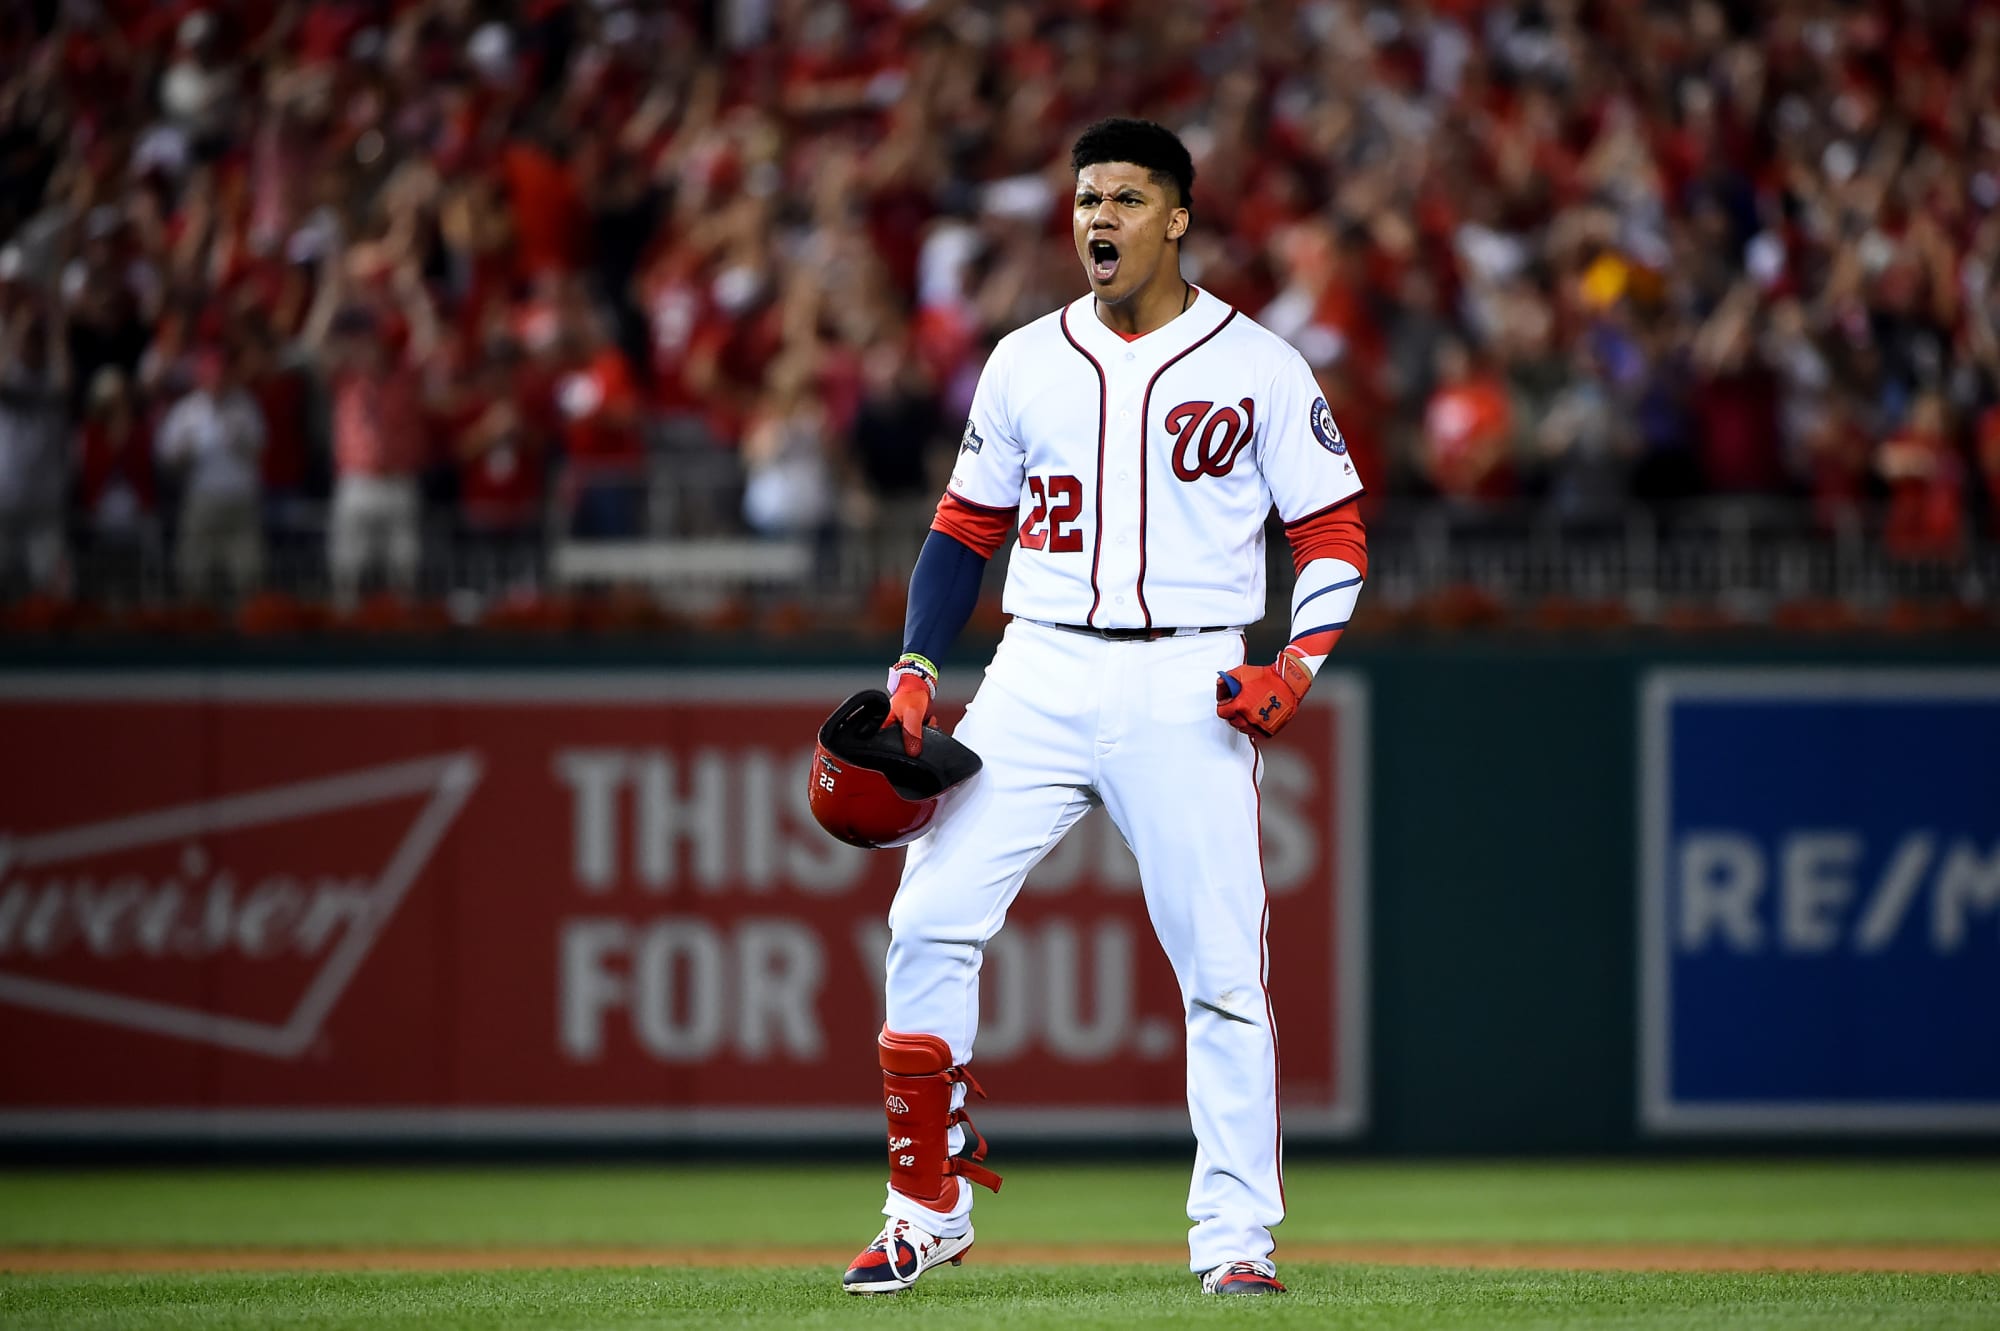 Juan Soto cemented his legacy in Washington Nationals history